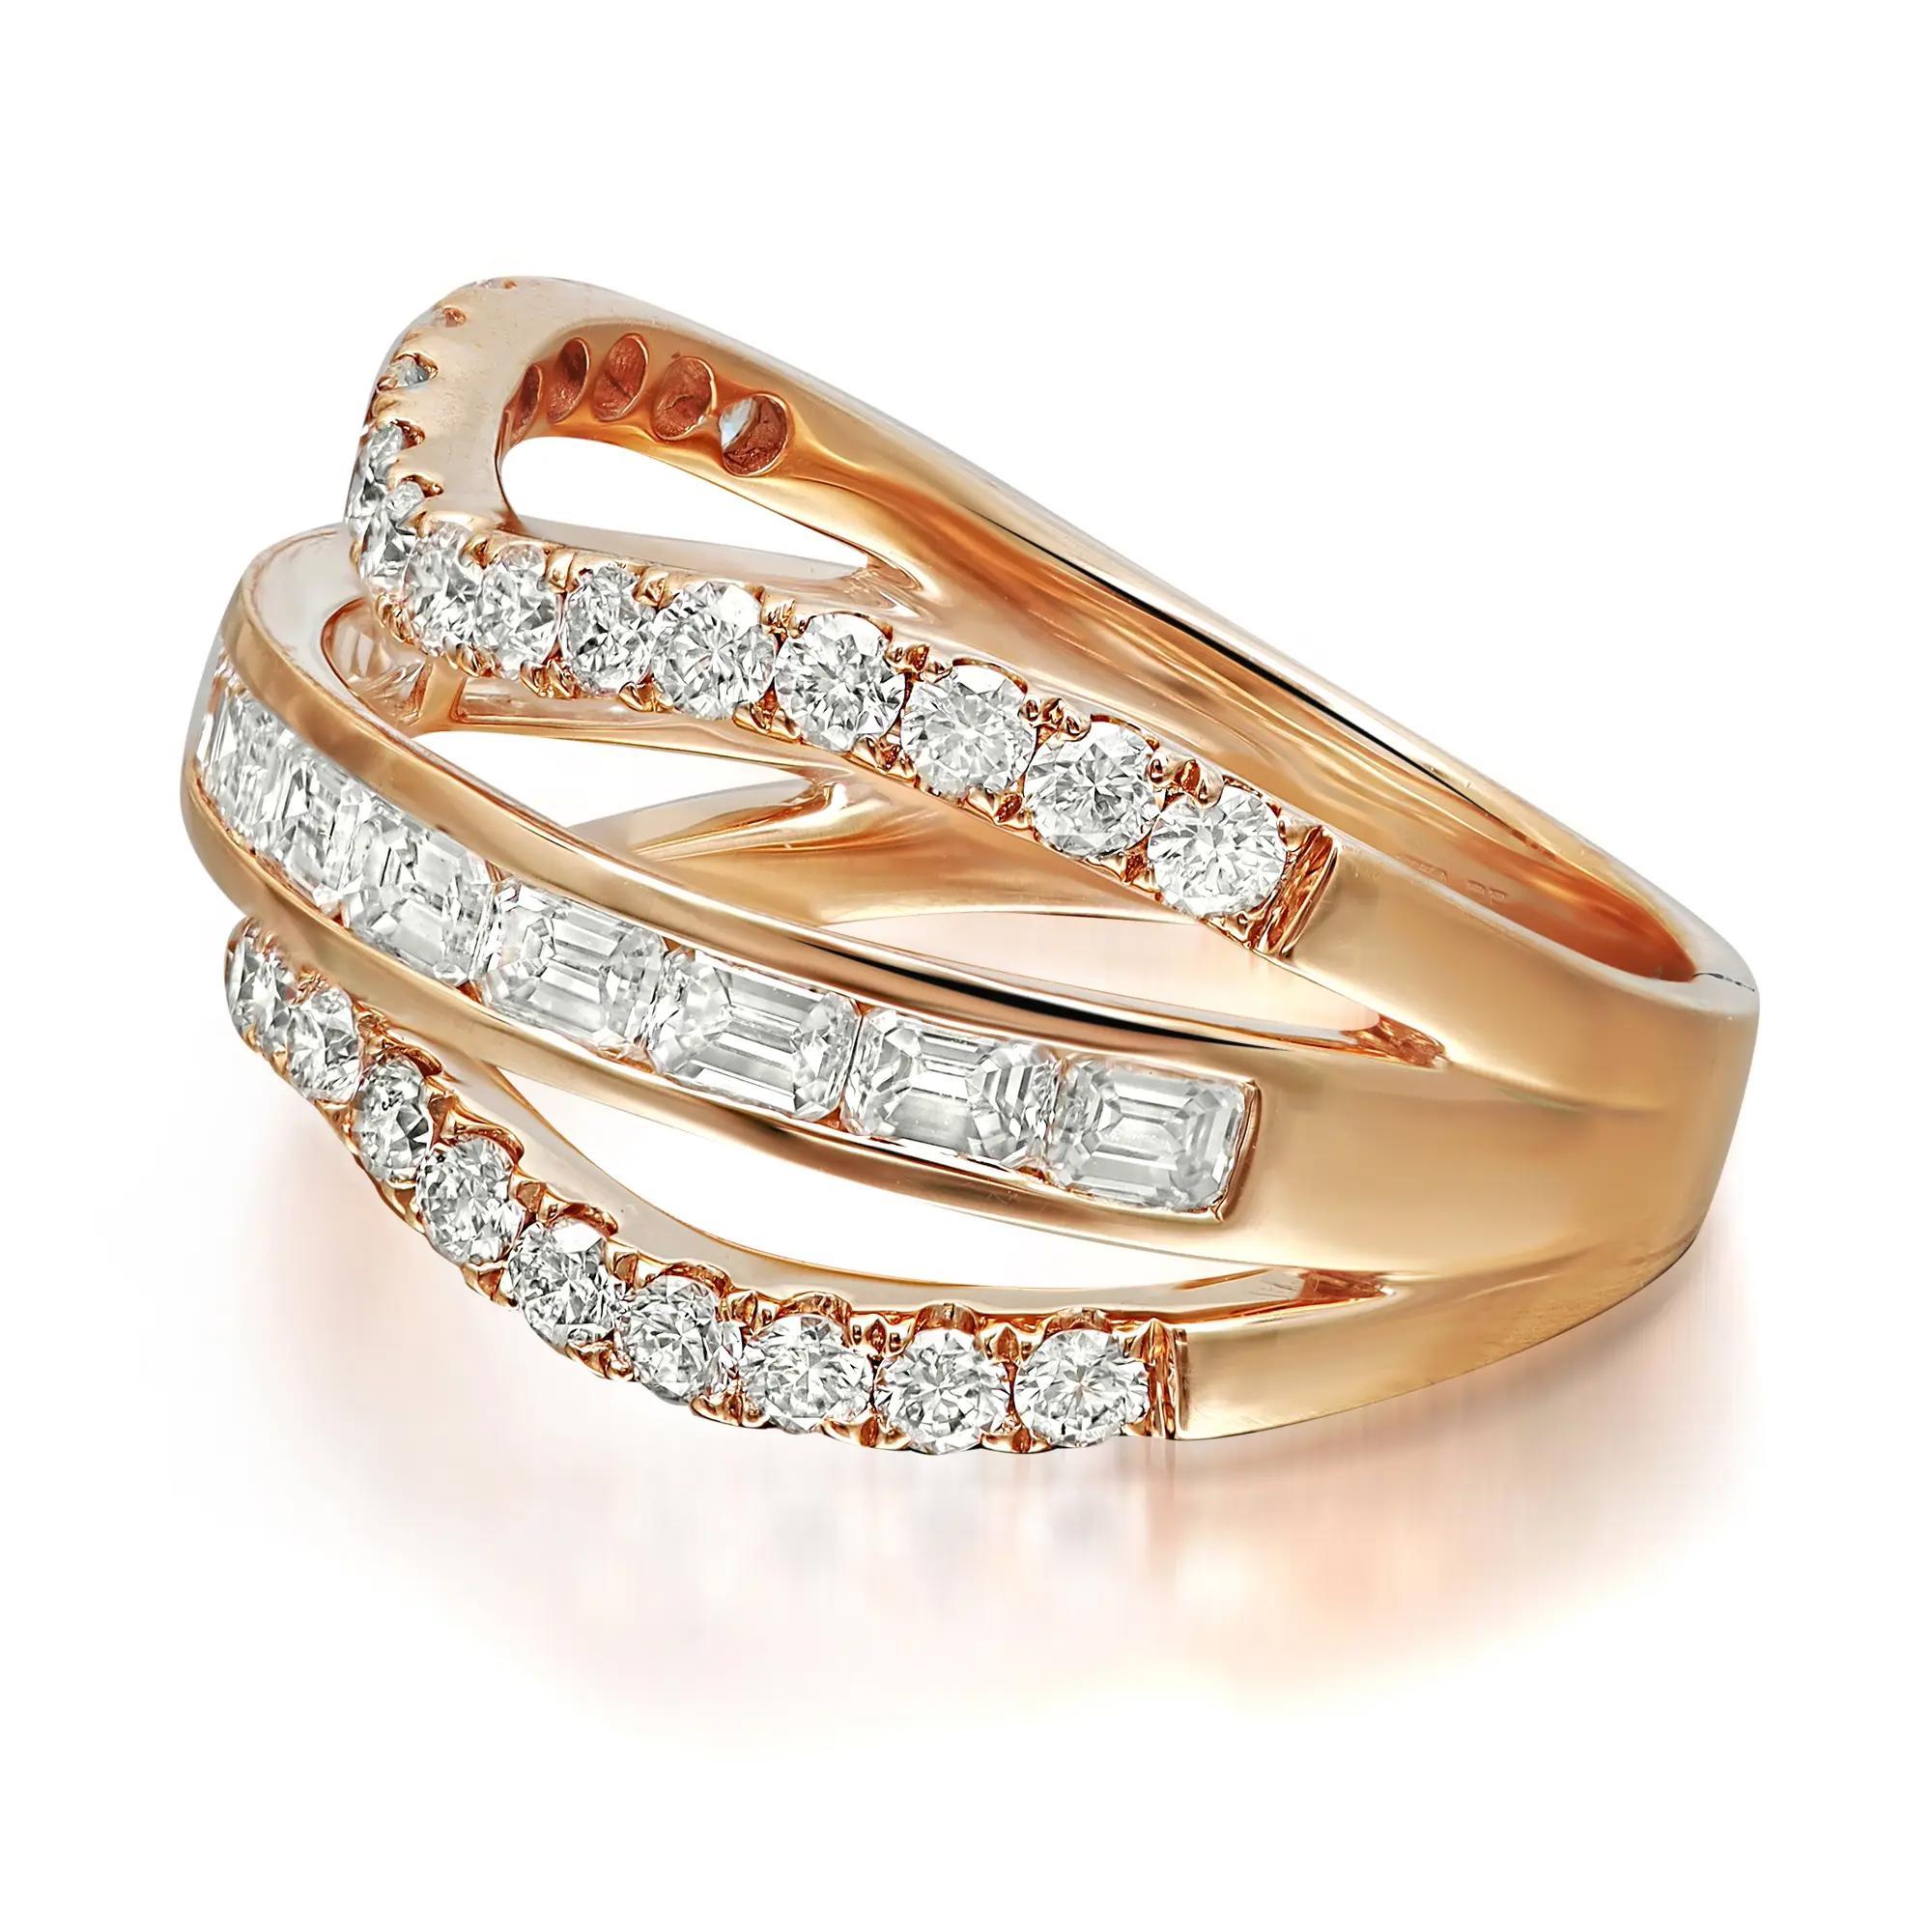 Modern Emerald Cut & Round Cut Diamond Band Ring 18K Rose Gold 1.61Cttw Size 6.5 For Sale